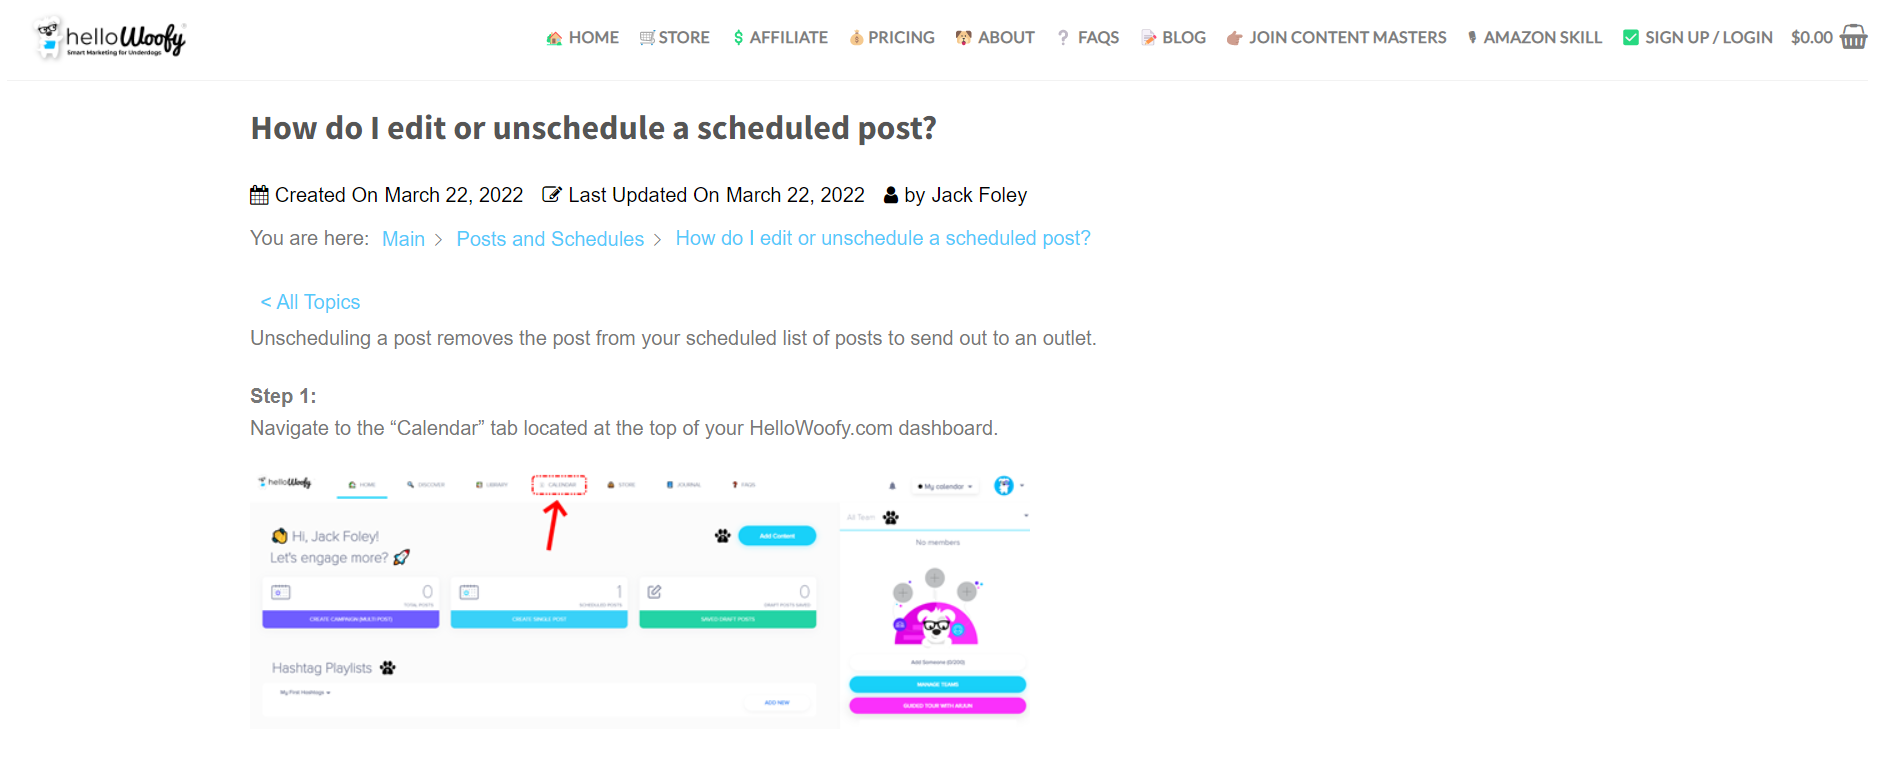 How-to-unschedule-or-edit-post_hellowoofy.com_social-media-marketing